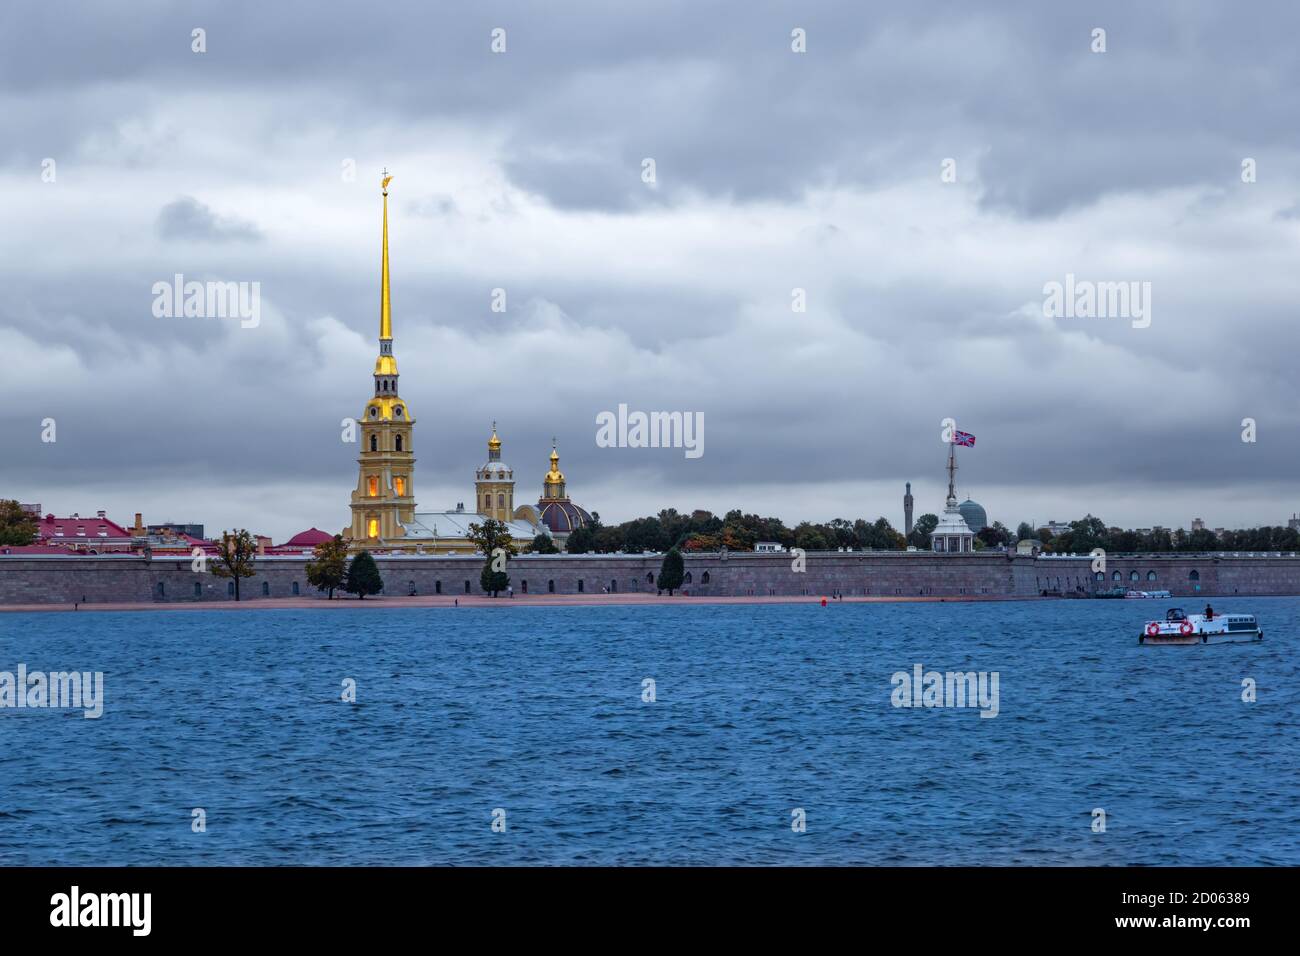 Peter and Paul Fortress, St. Petersburg, Russia Stock Photo